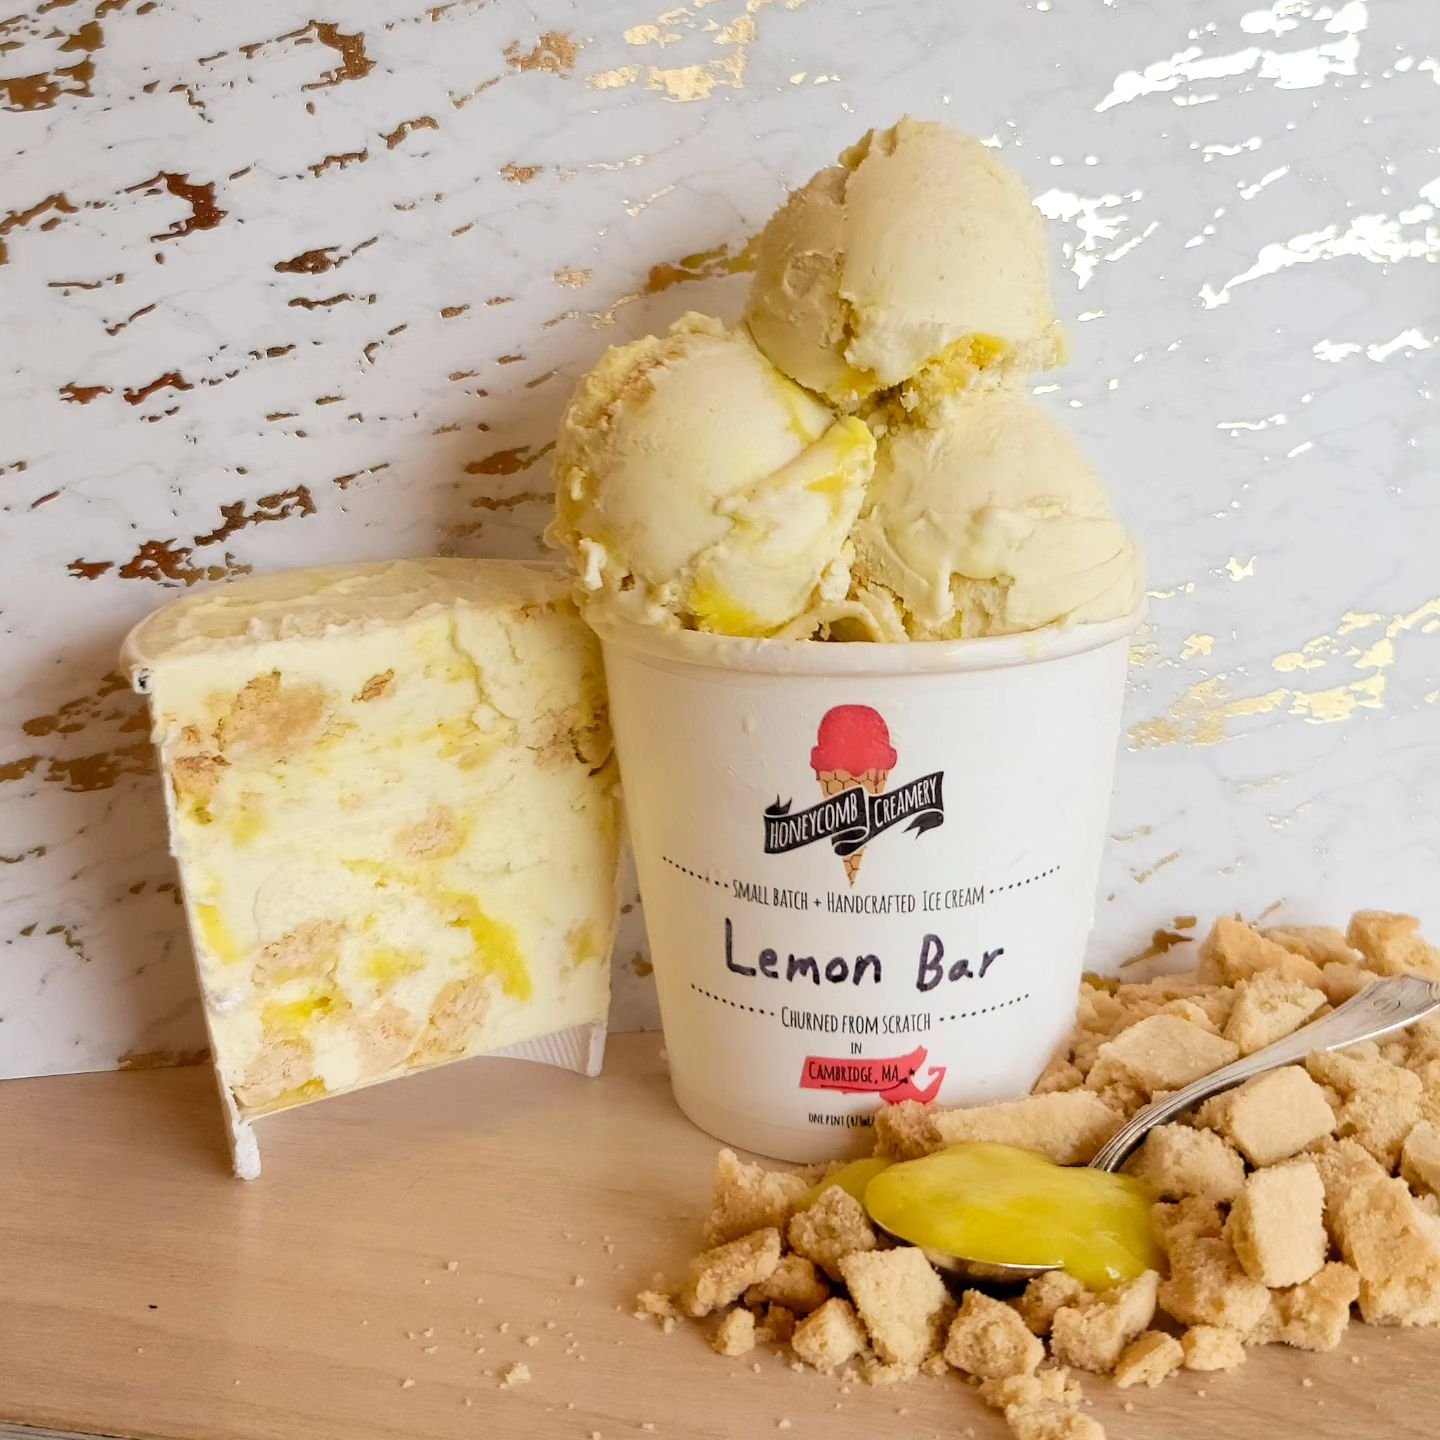 We have a feeling this is just the kind of sunshine y'all need for this rainy day...🌞🍦

LEMON BAR is a vegan lemon ice cream layered with pieces of homemade vegan and gluten-free shortbread and ribbons of vegan lemon curd. Made with coconut cream a